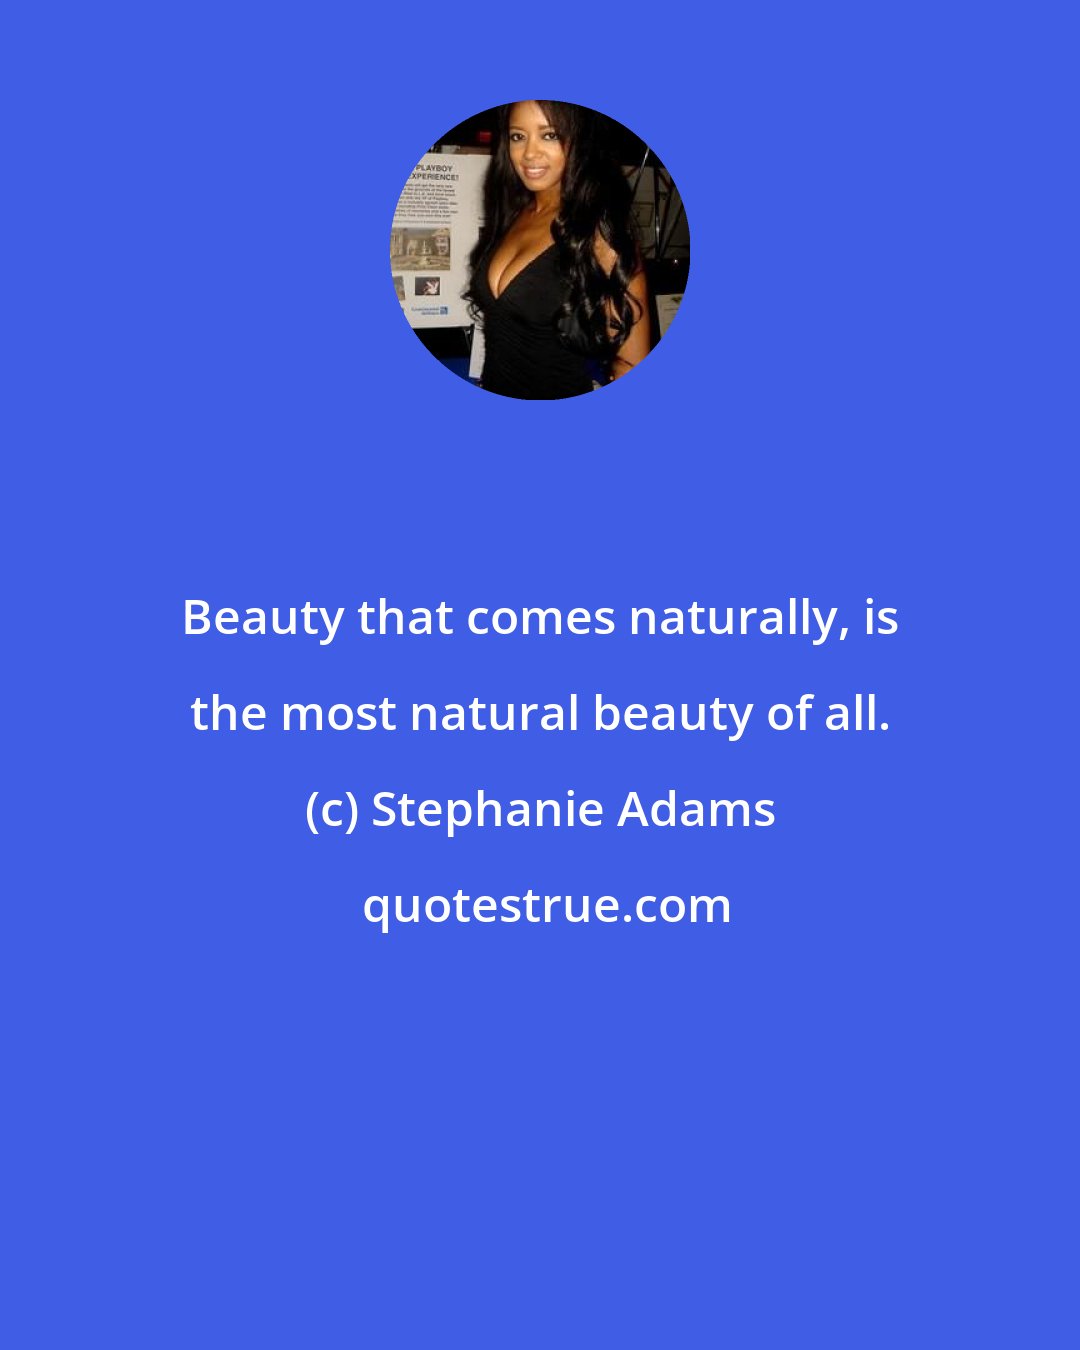 Stephanie Adams: Beauty that comes naturally, is the most natural beauty of all.